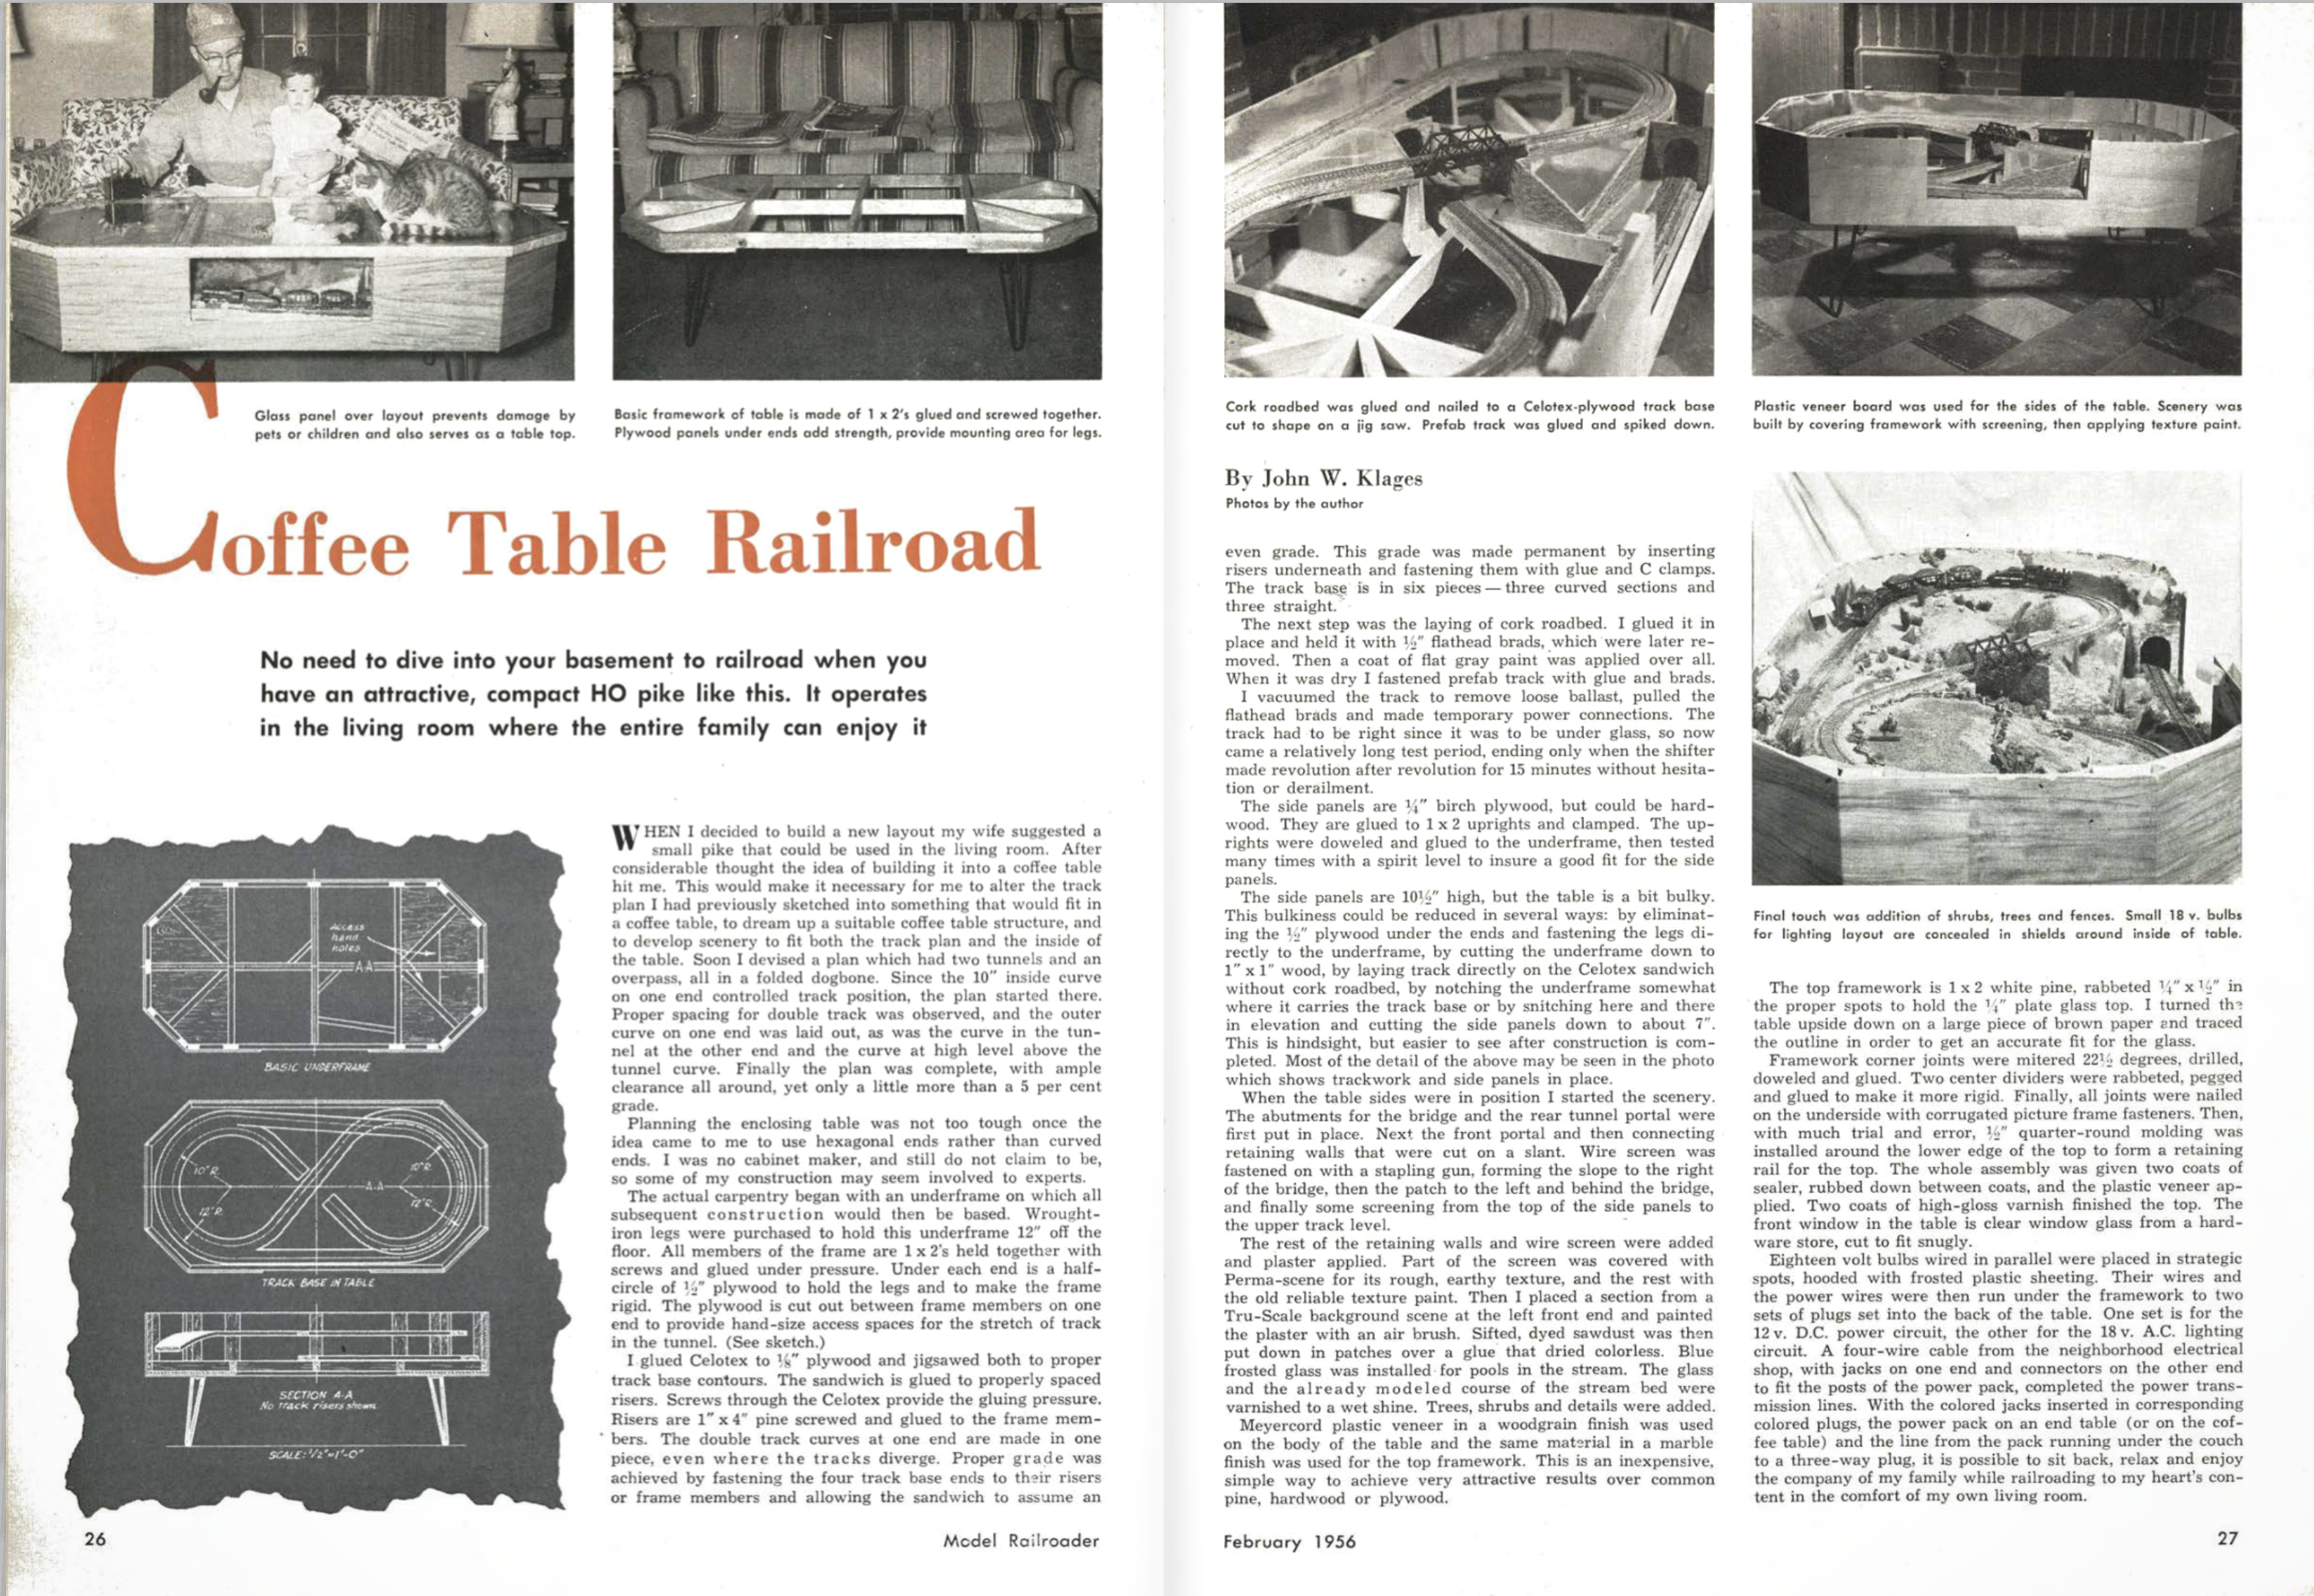 Magazine spread showing various black and white photos and a small blueprint along with blocks of text